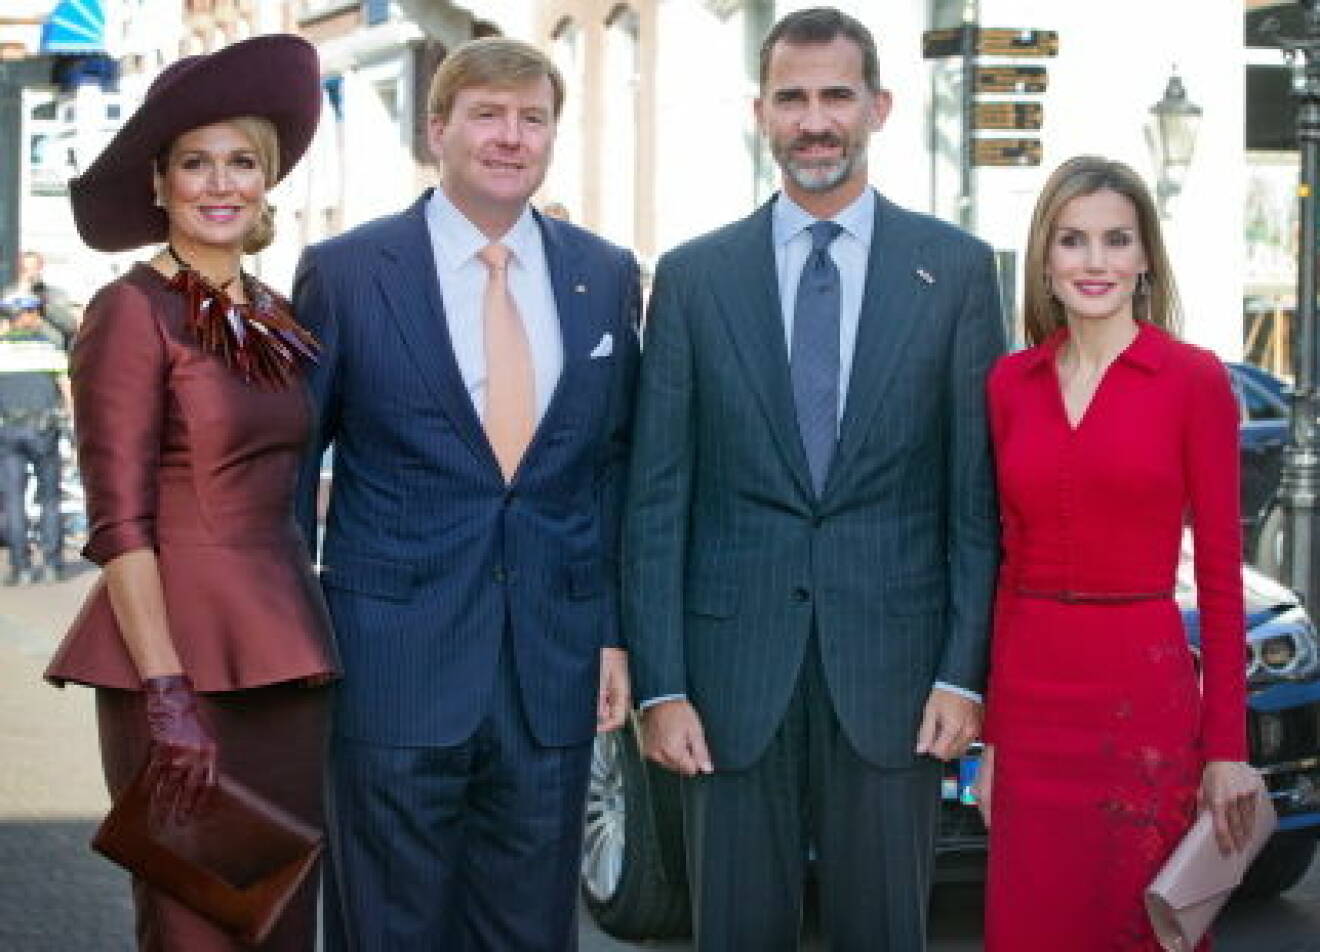 Dutch Royals Welcome Spanish Royals - The Hague